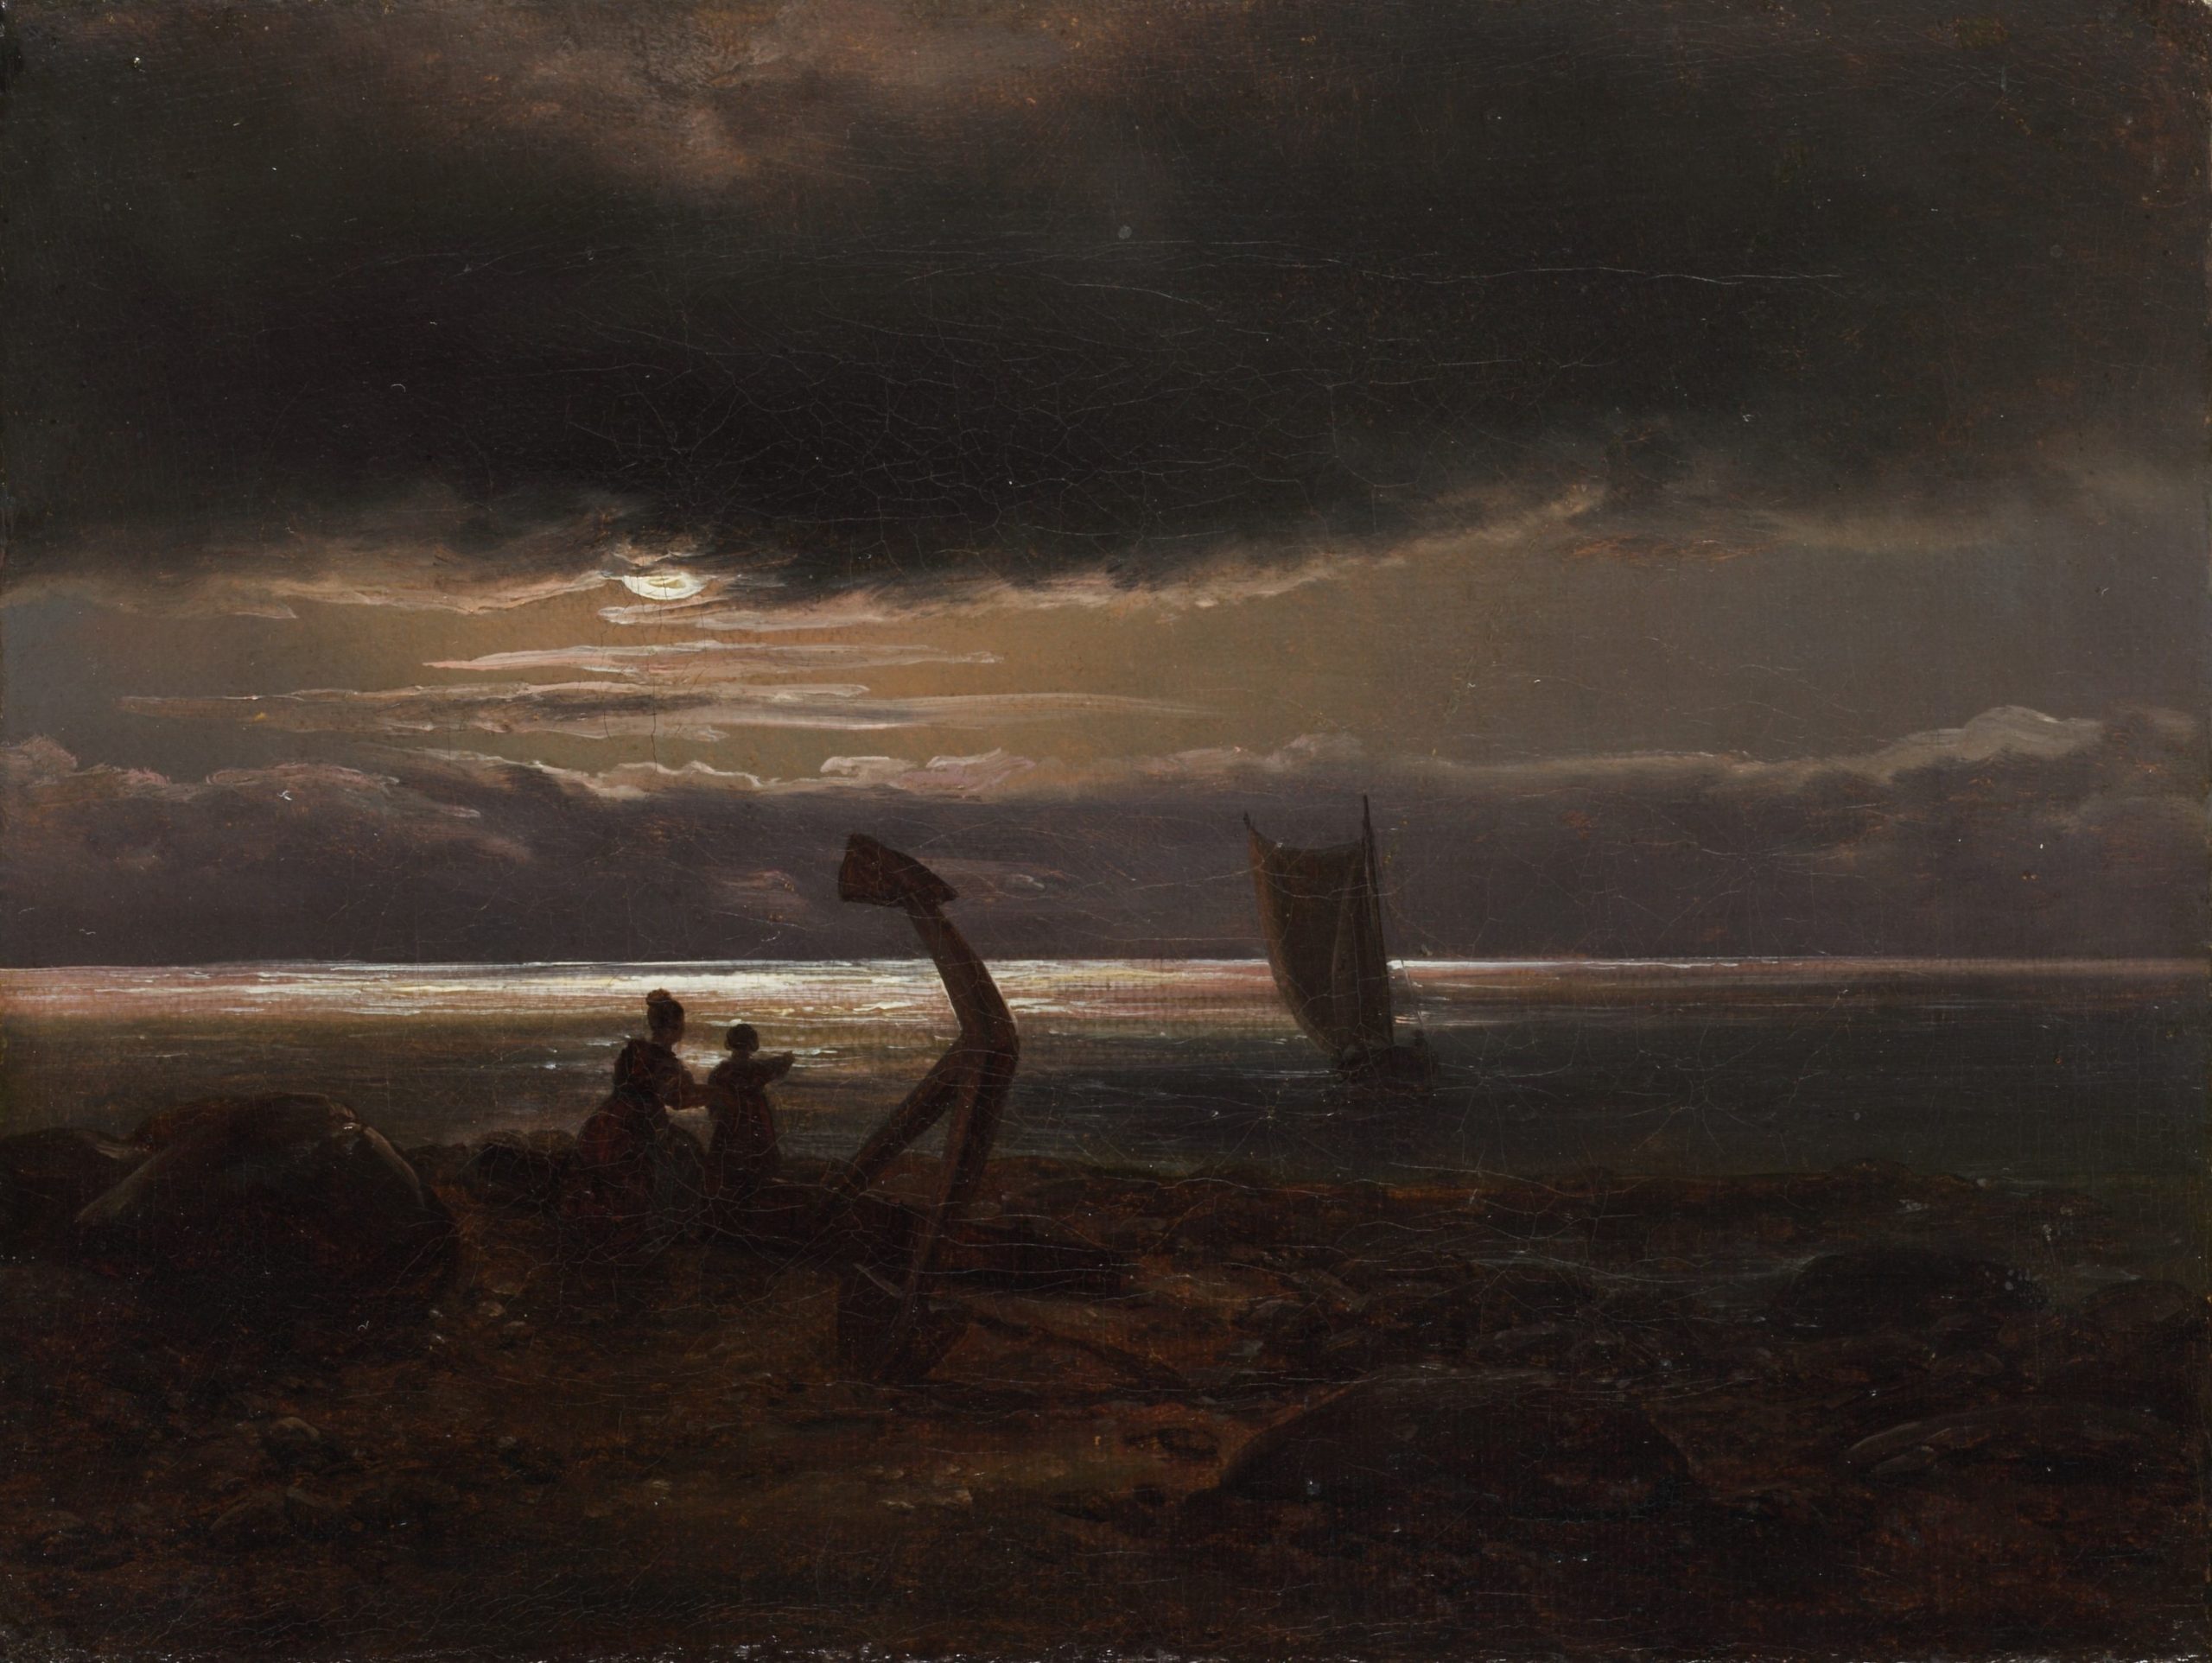 Mother and Child by the Sea by Johan Christian Dahl, ca. 1830. European Paintings Collection at The Metropolitan Museum of Art.